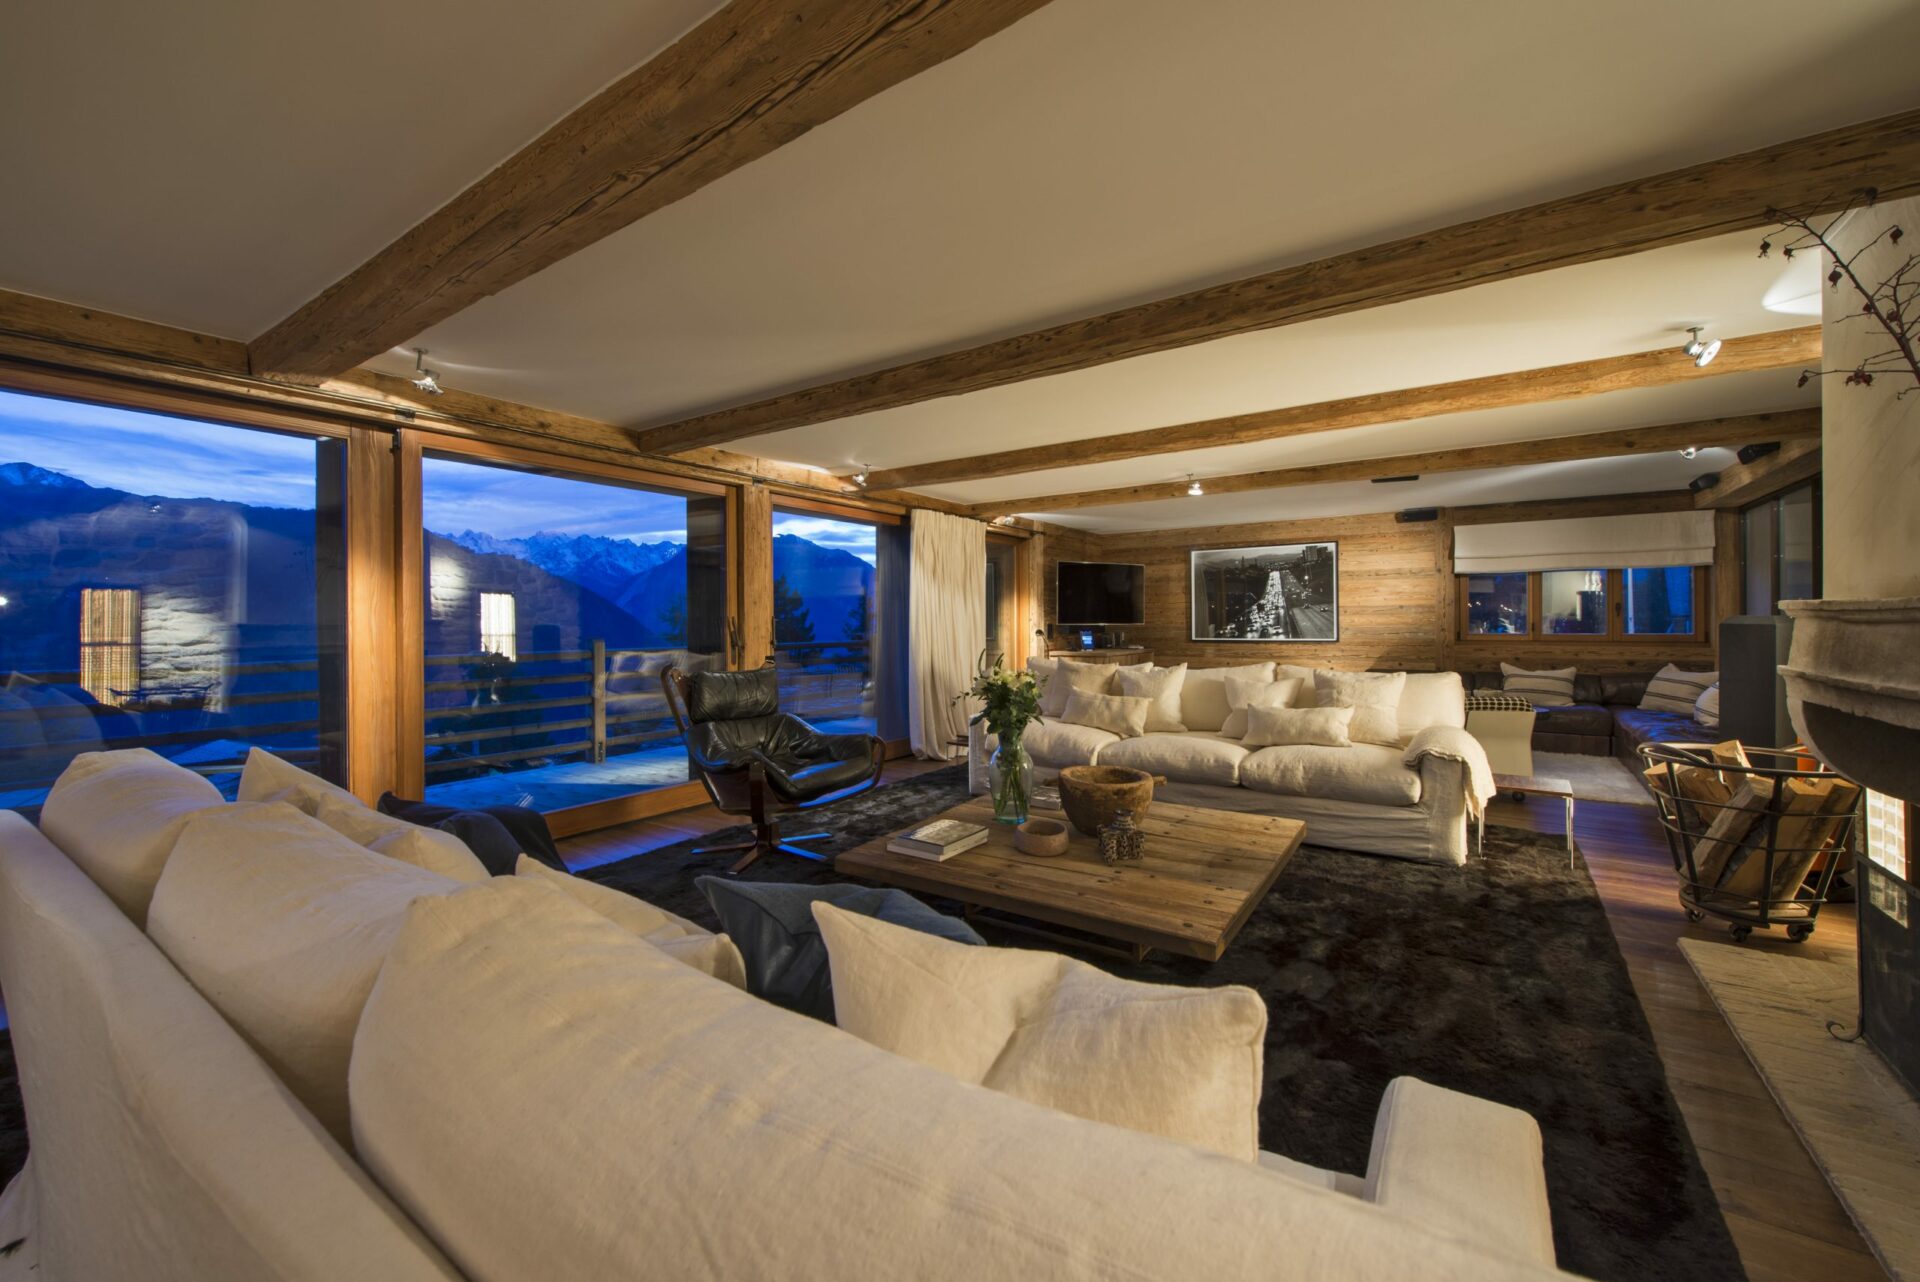 Large living room of Chalet 1936 in the Swiss Alps holiday resort of Verbier